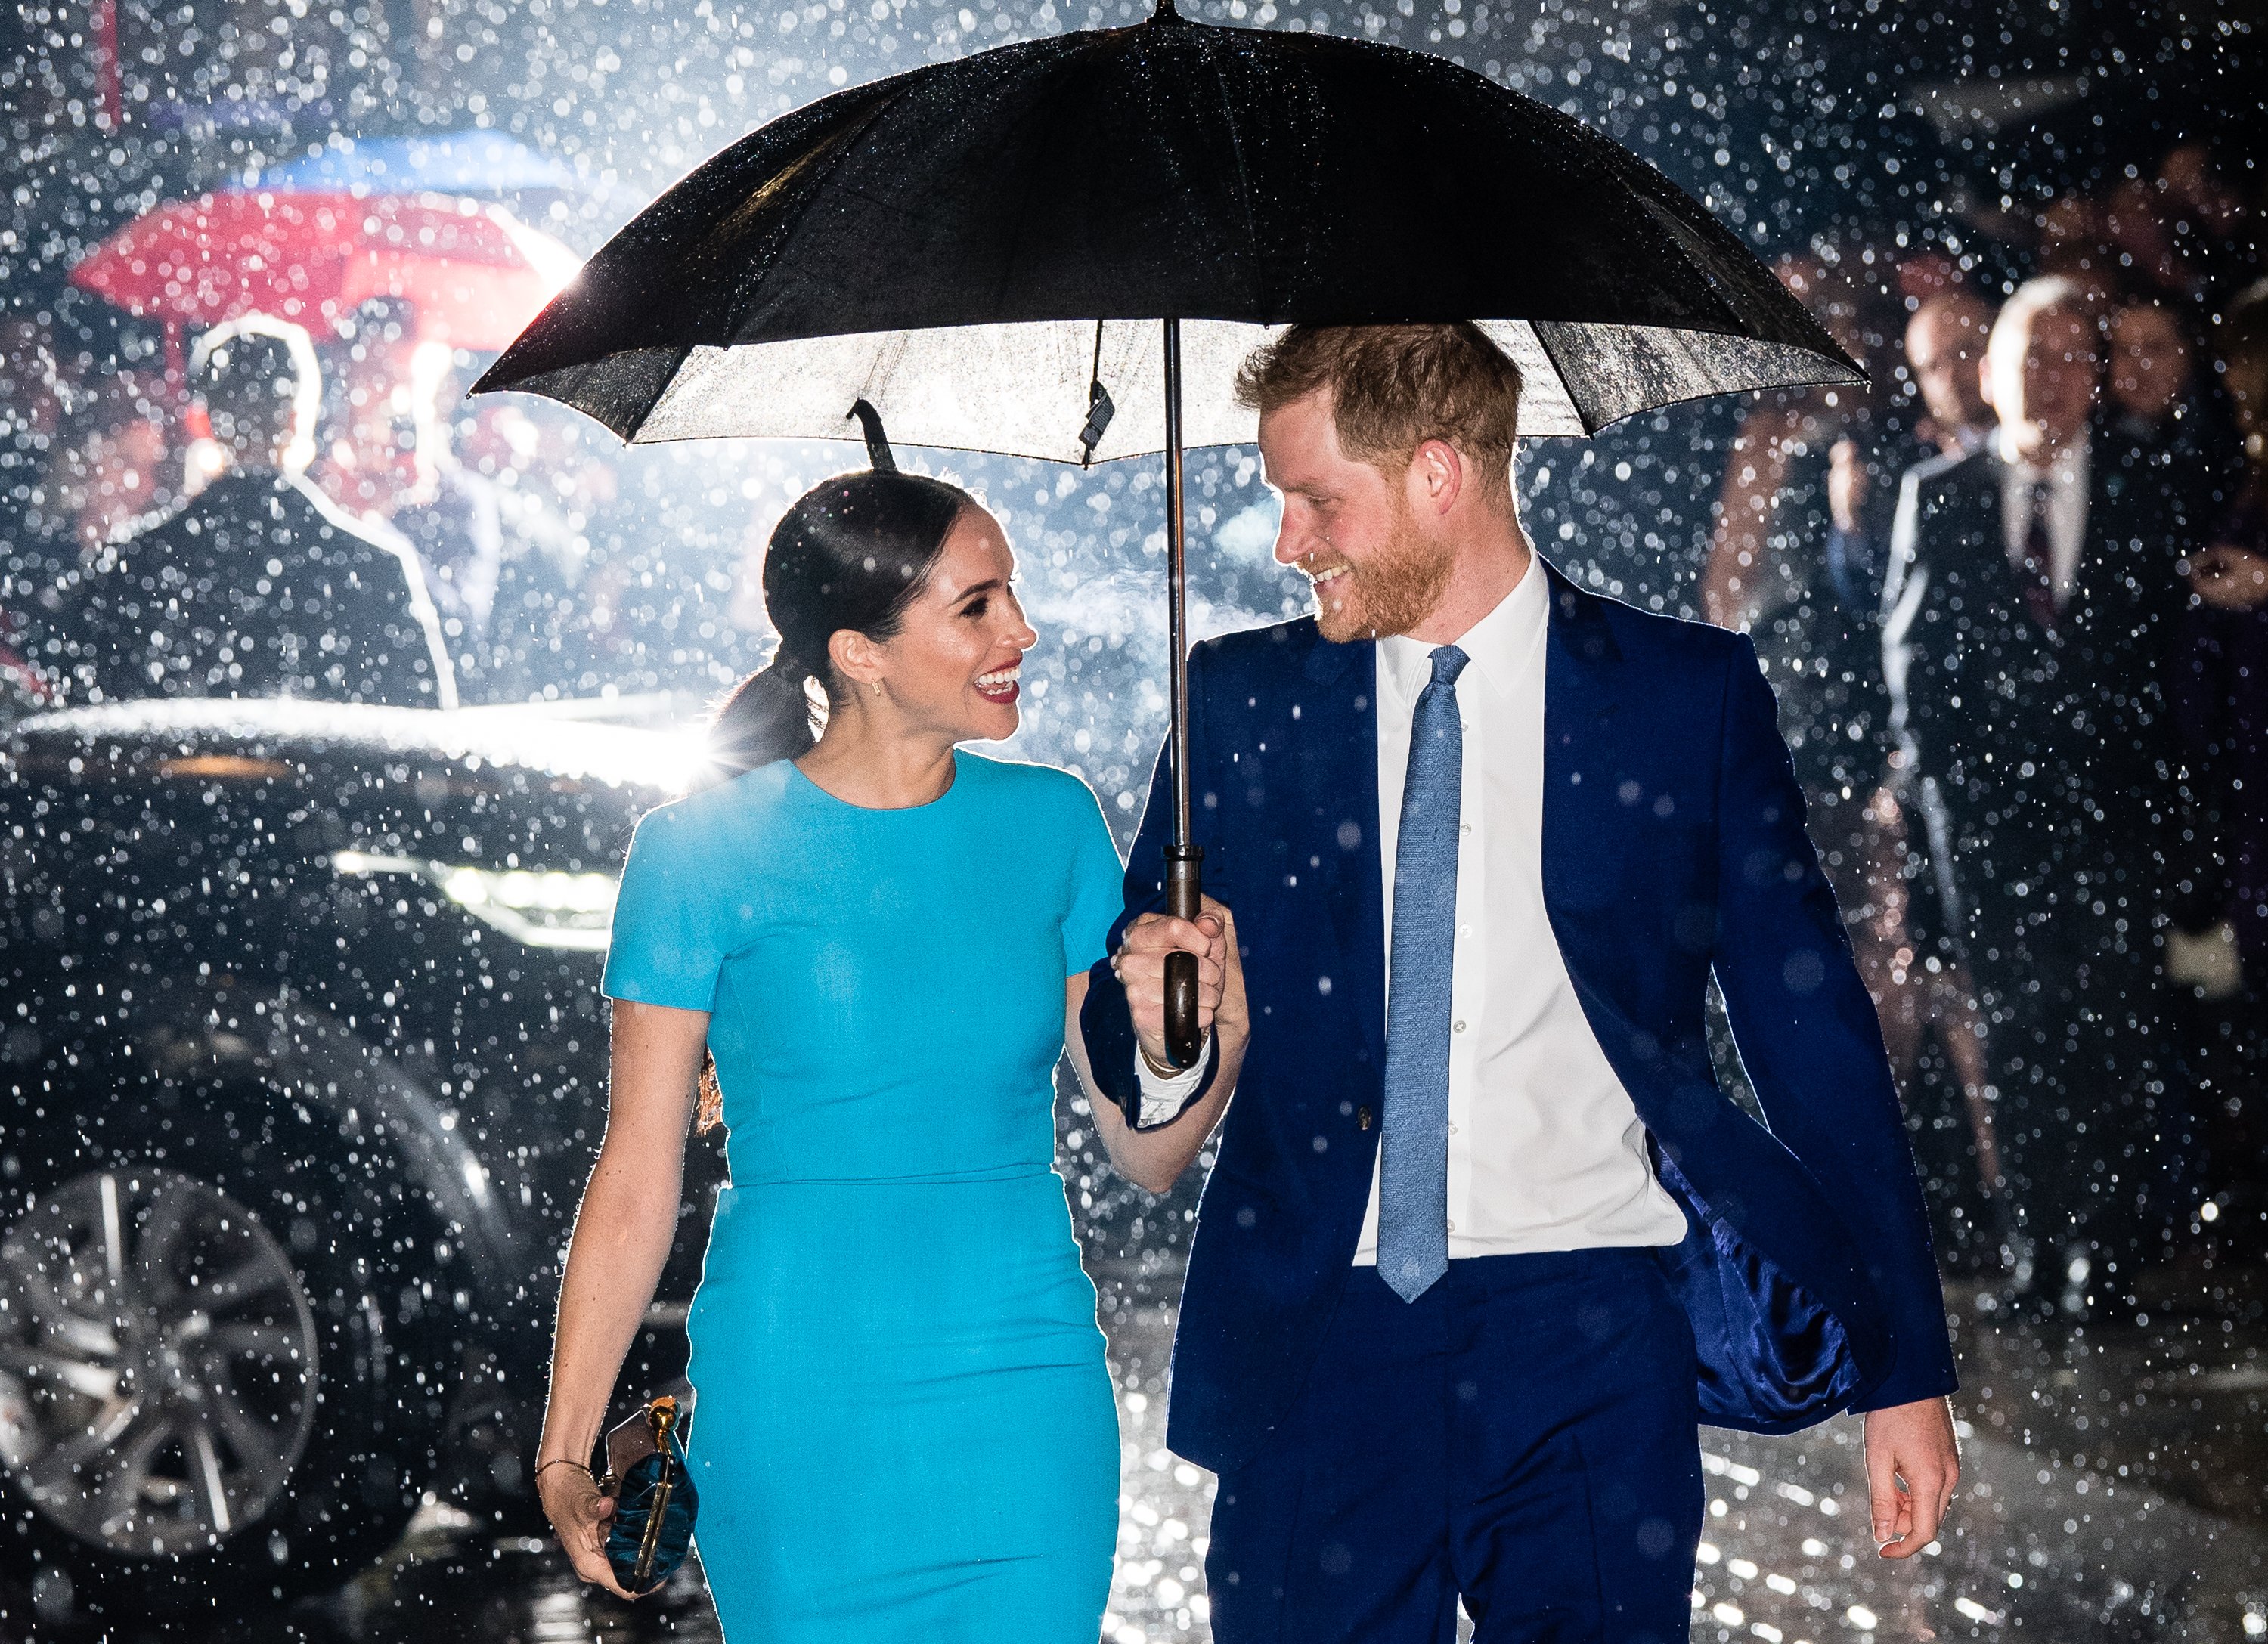 Prince Harry and Meghan Markle attend The Endeavour Fund Awards on March 05, 2020 | Photo: Getty Images.